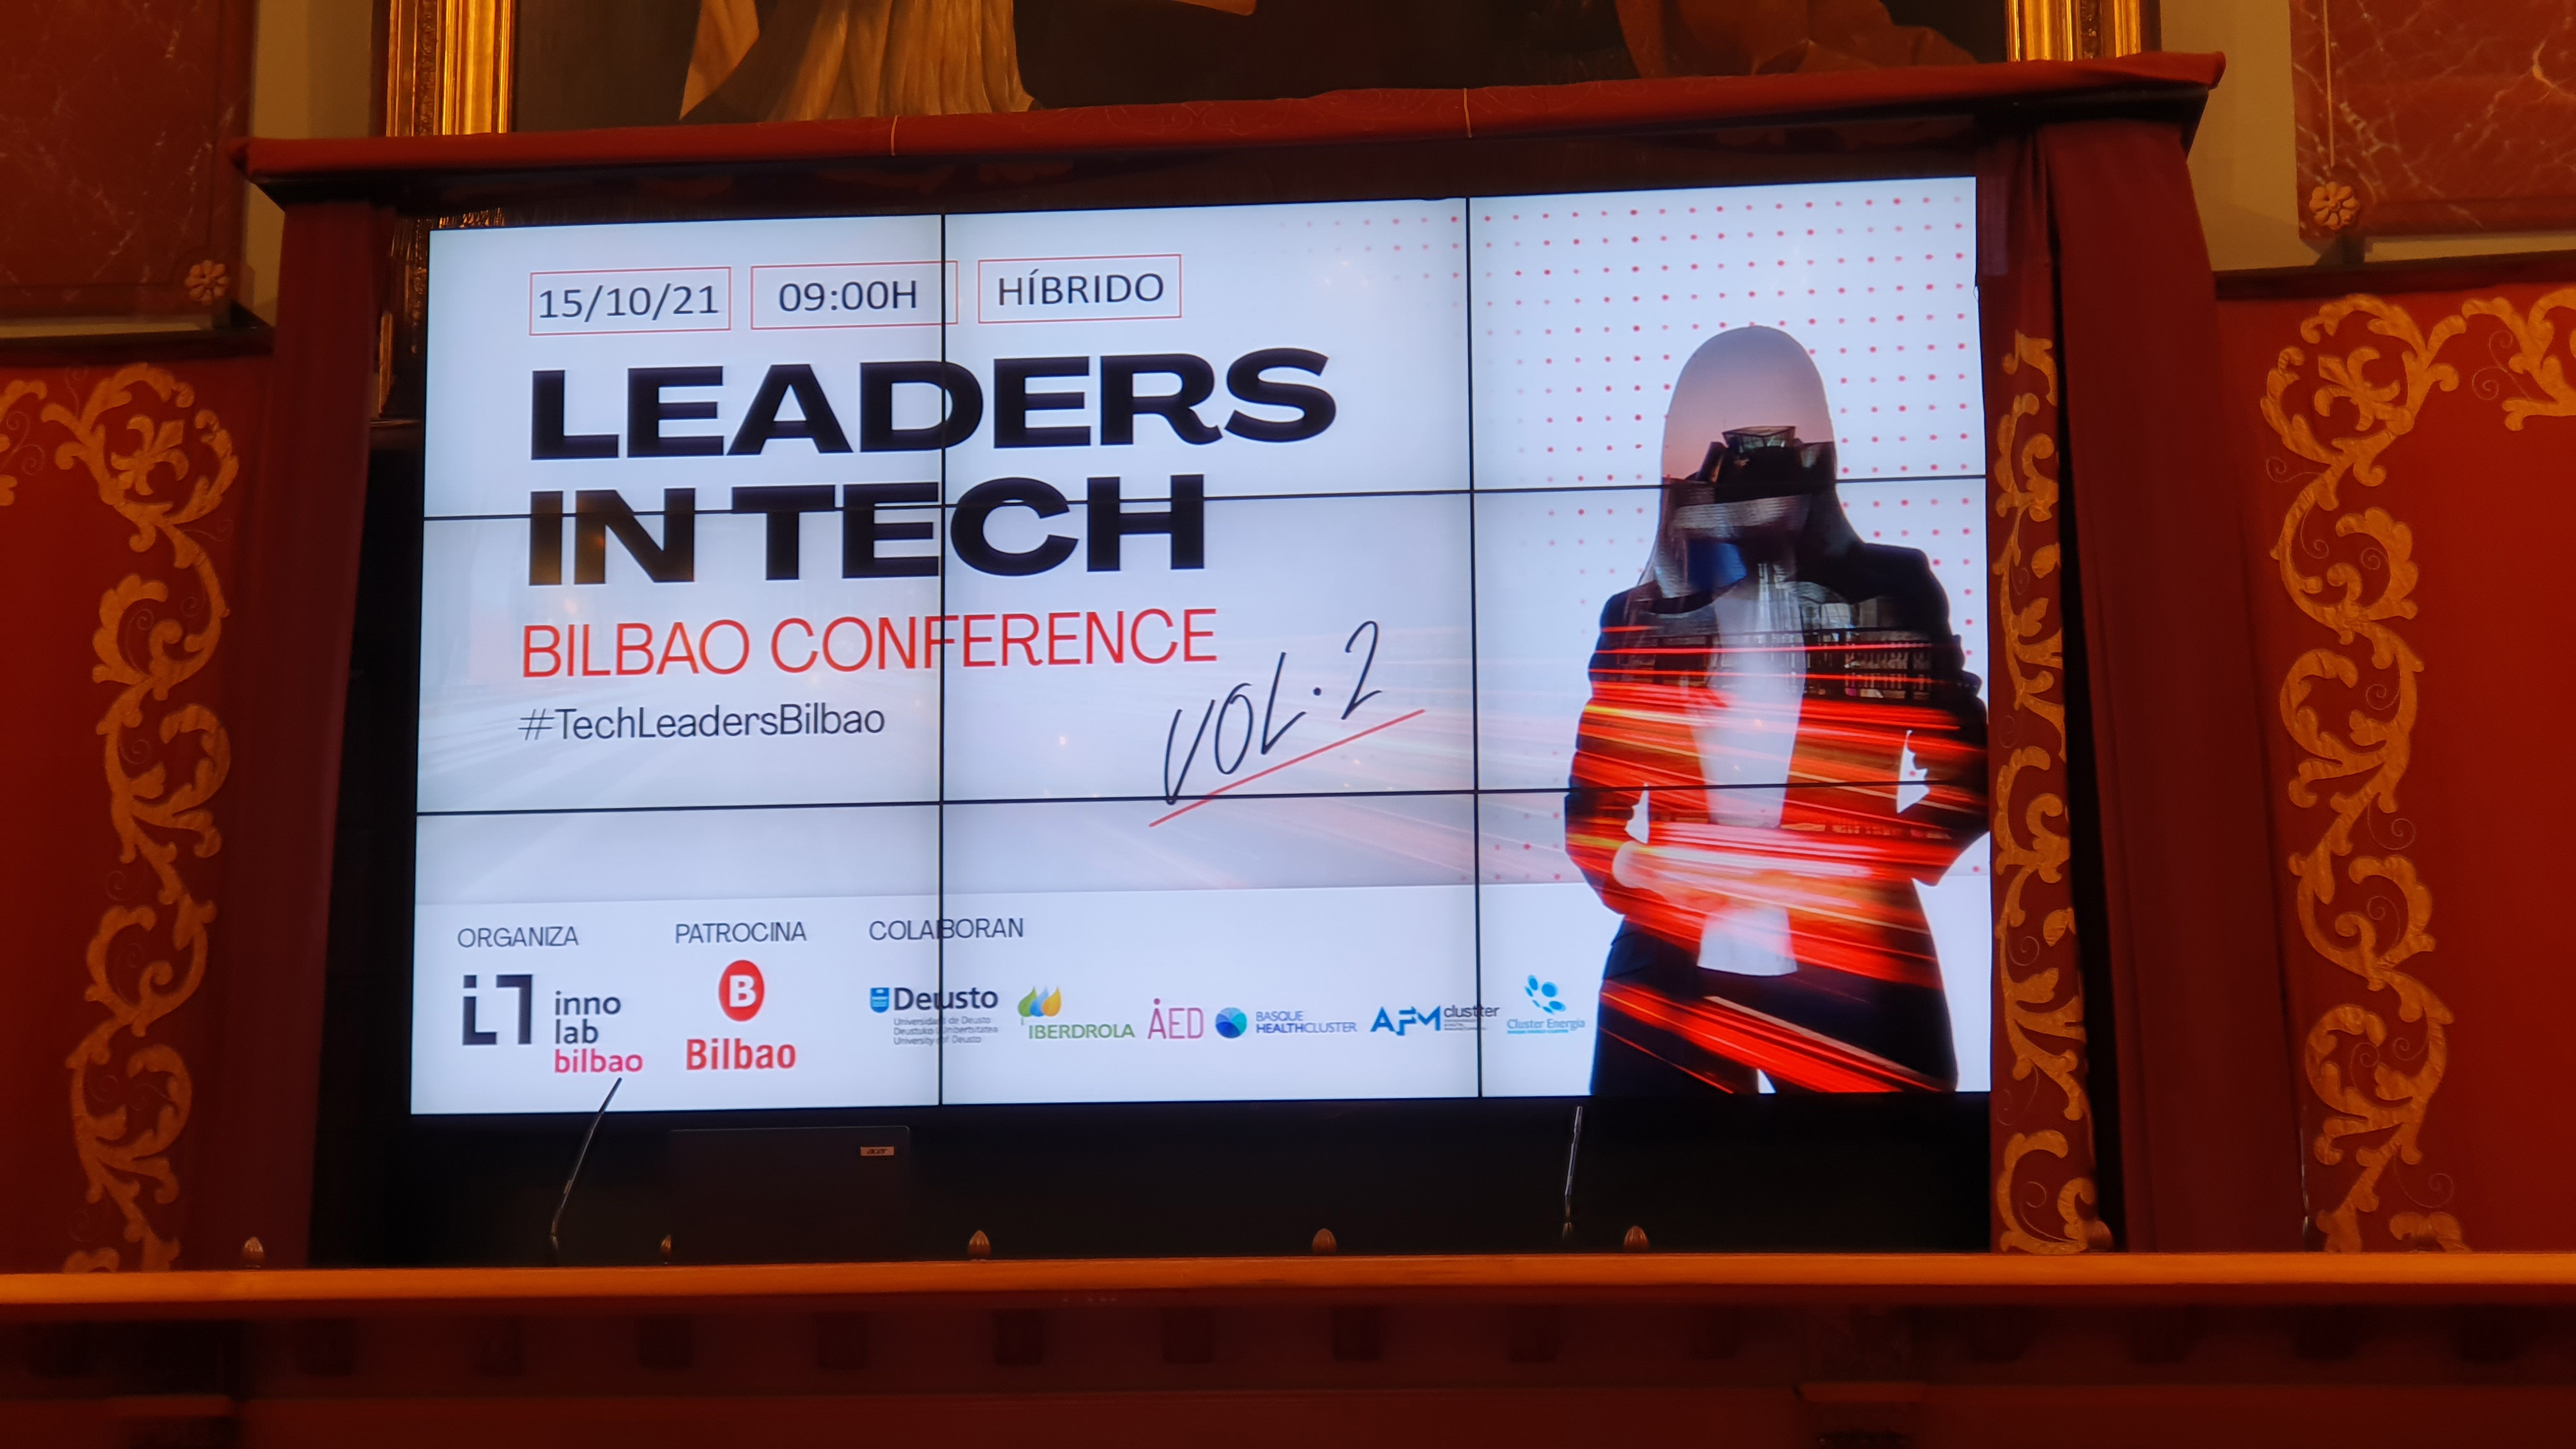 IDEKO commits to technological leadership at the Leaders in Tech 2021 forum